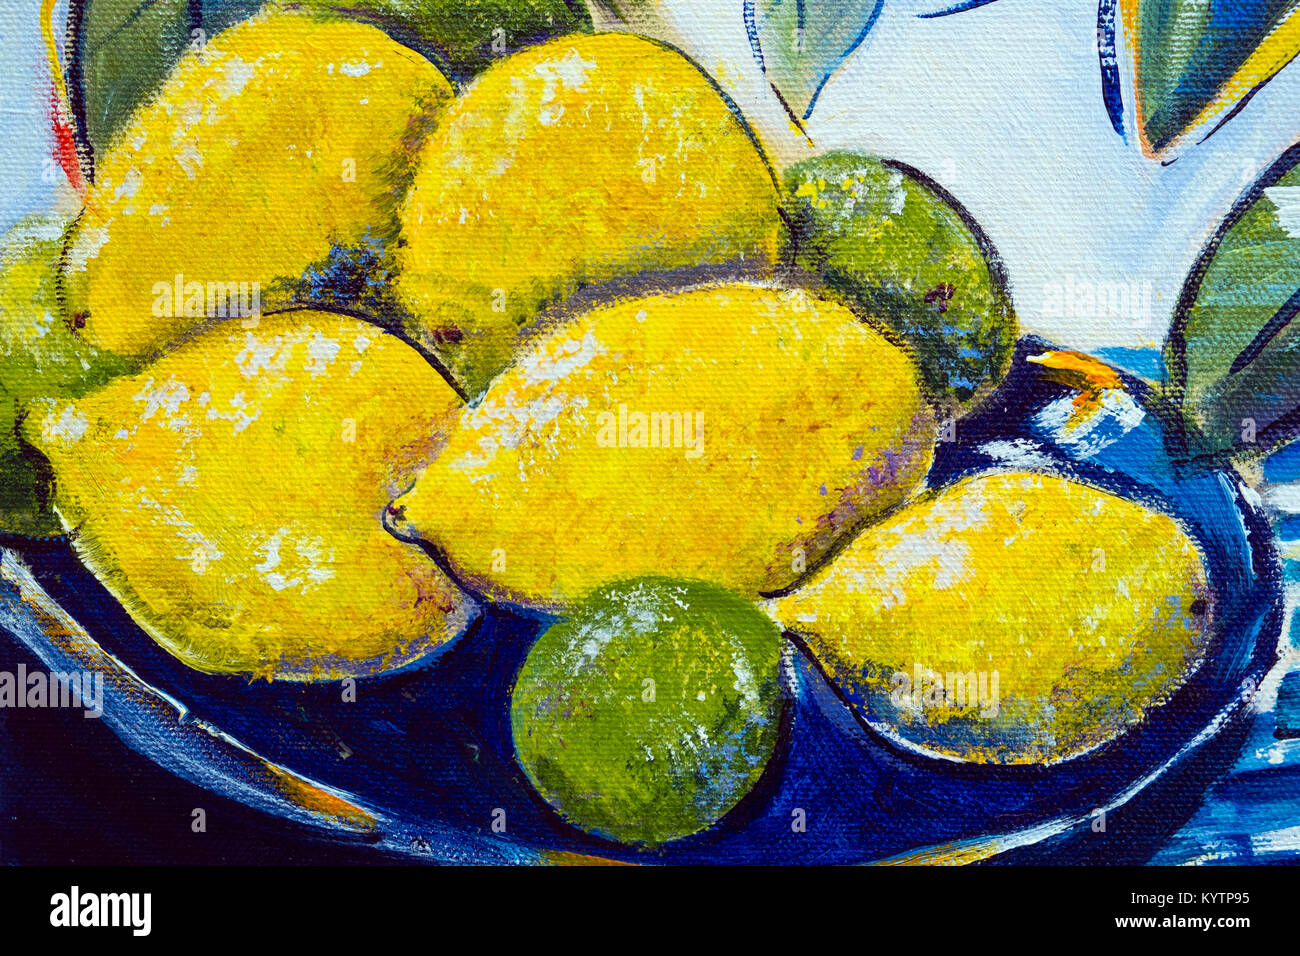 Vibrant multi-colored original oil painting close up detail showing brushwork and canvas textures - lemons Stock Photo